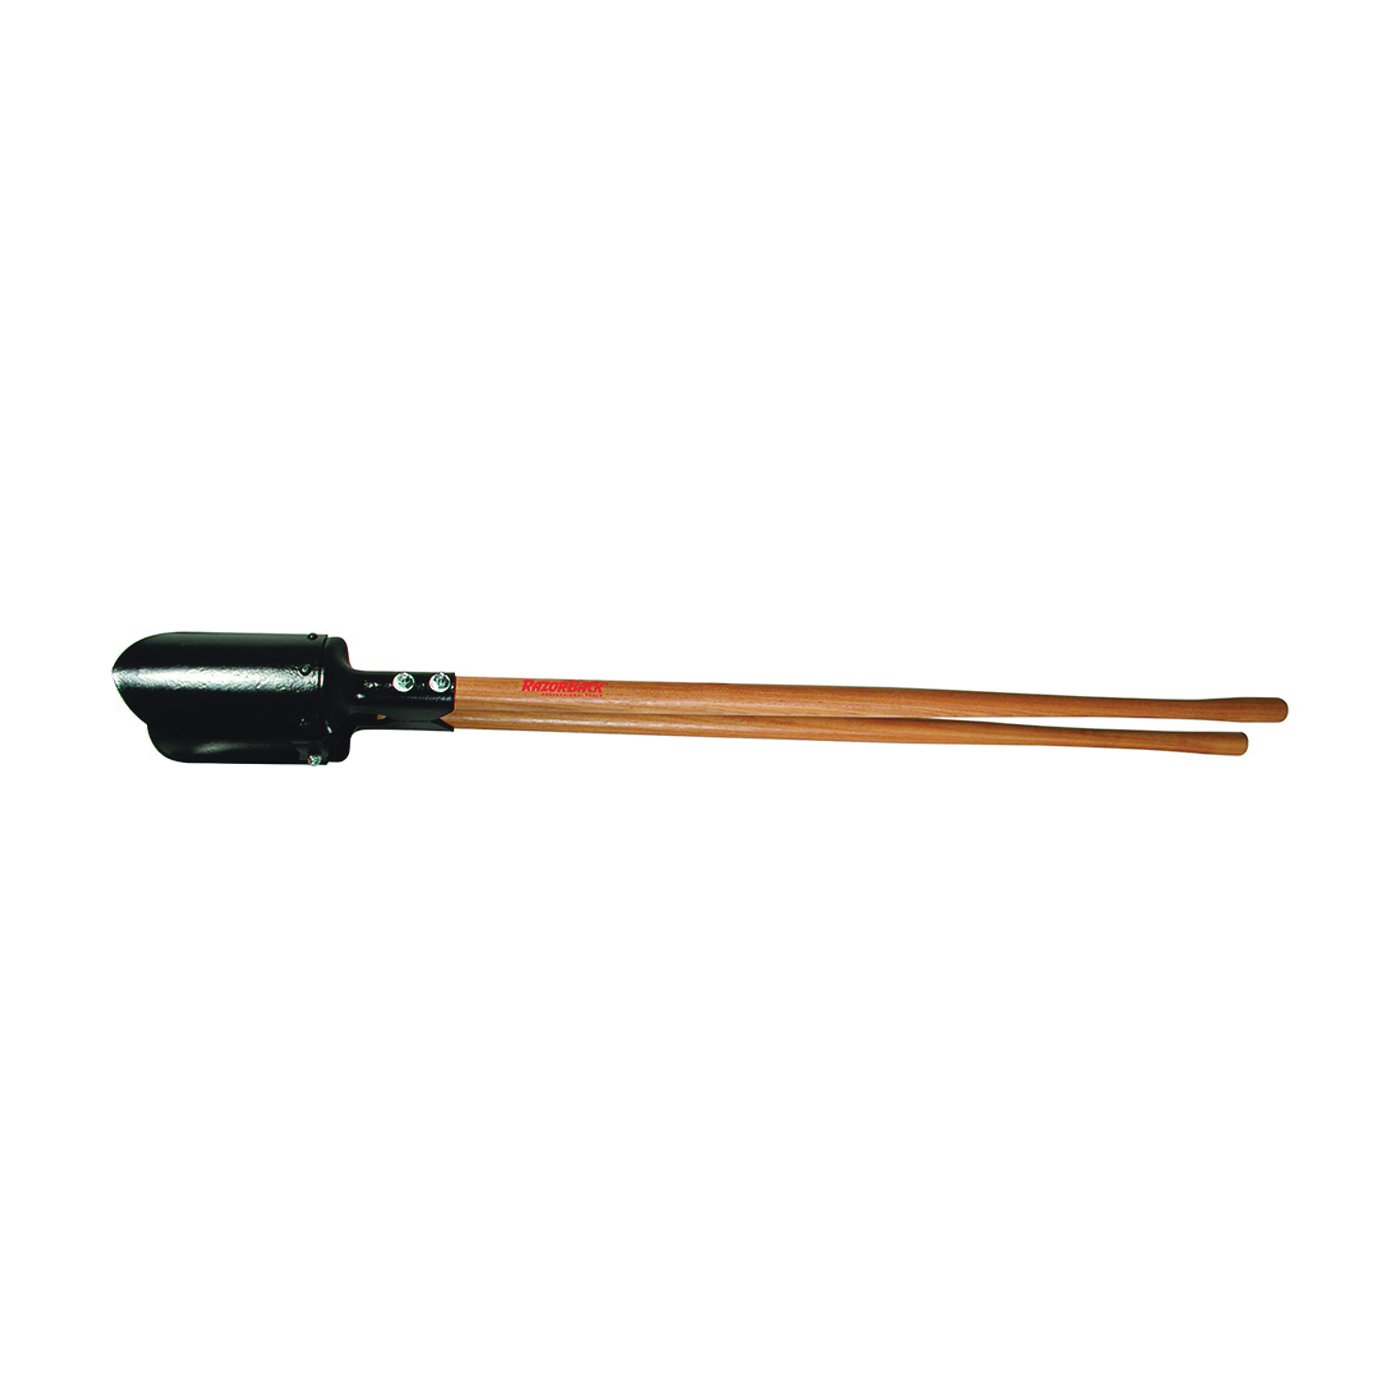 78005 Post Hole Digger with Handle, 11-1/2 in L Blade, Riveted Blade, HCS Blade, Hardwood Handle